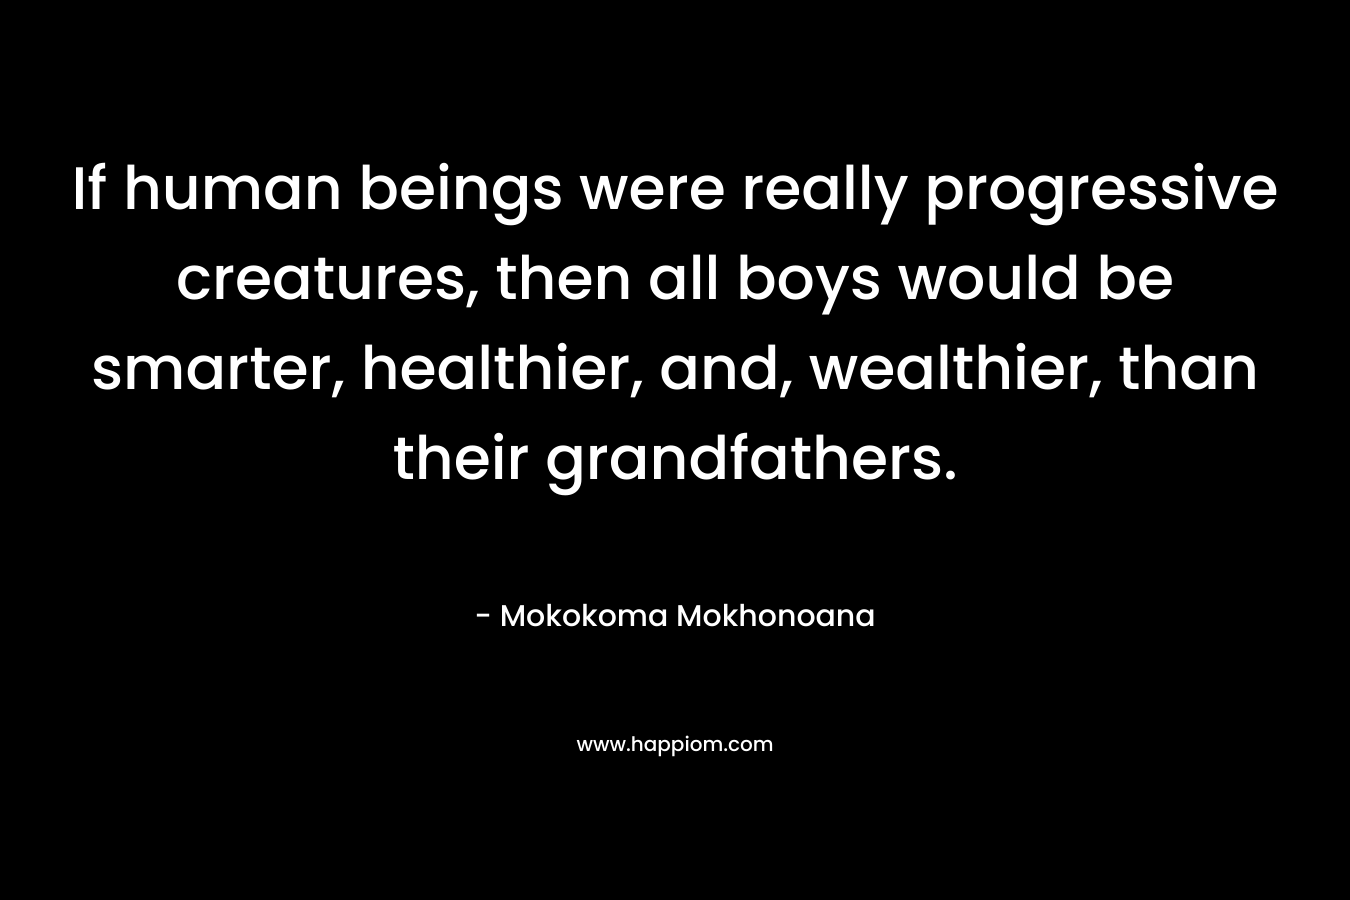 If human beings were really progressive creatures, then all boys would be smarter, healthier, and, wealthier, than their grandfathers. – Mokokoma Mokhonoana